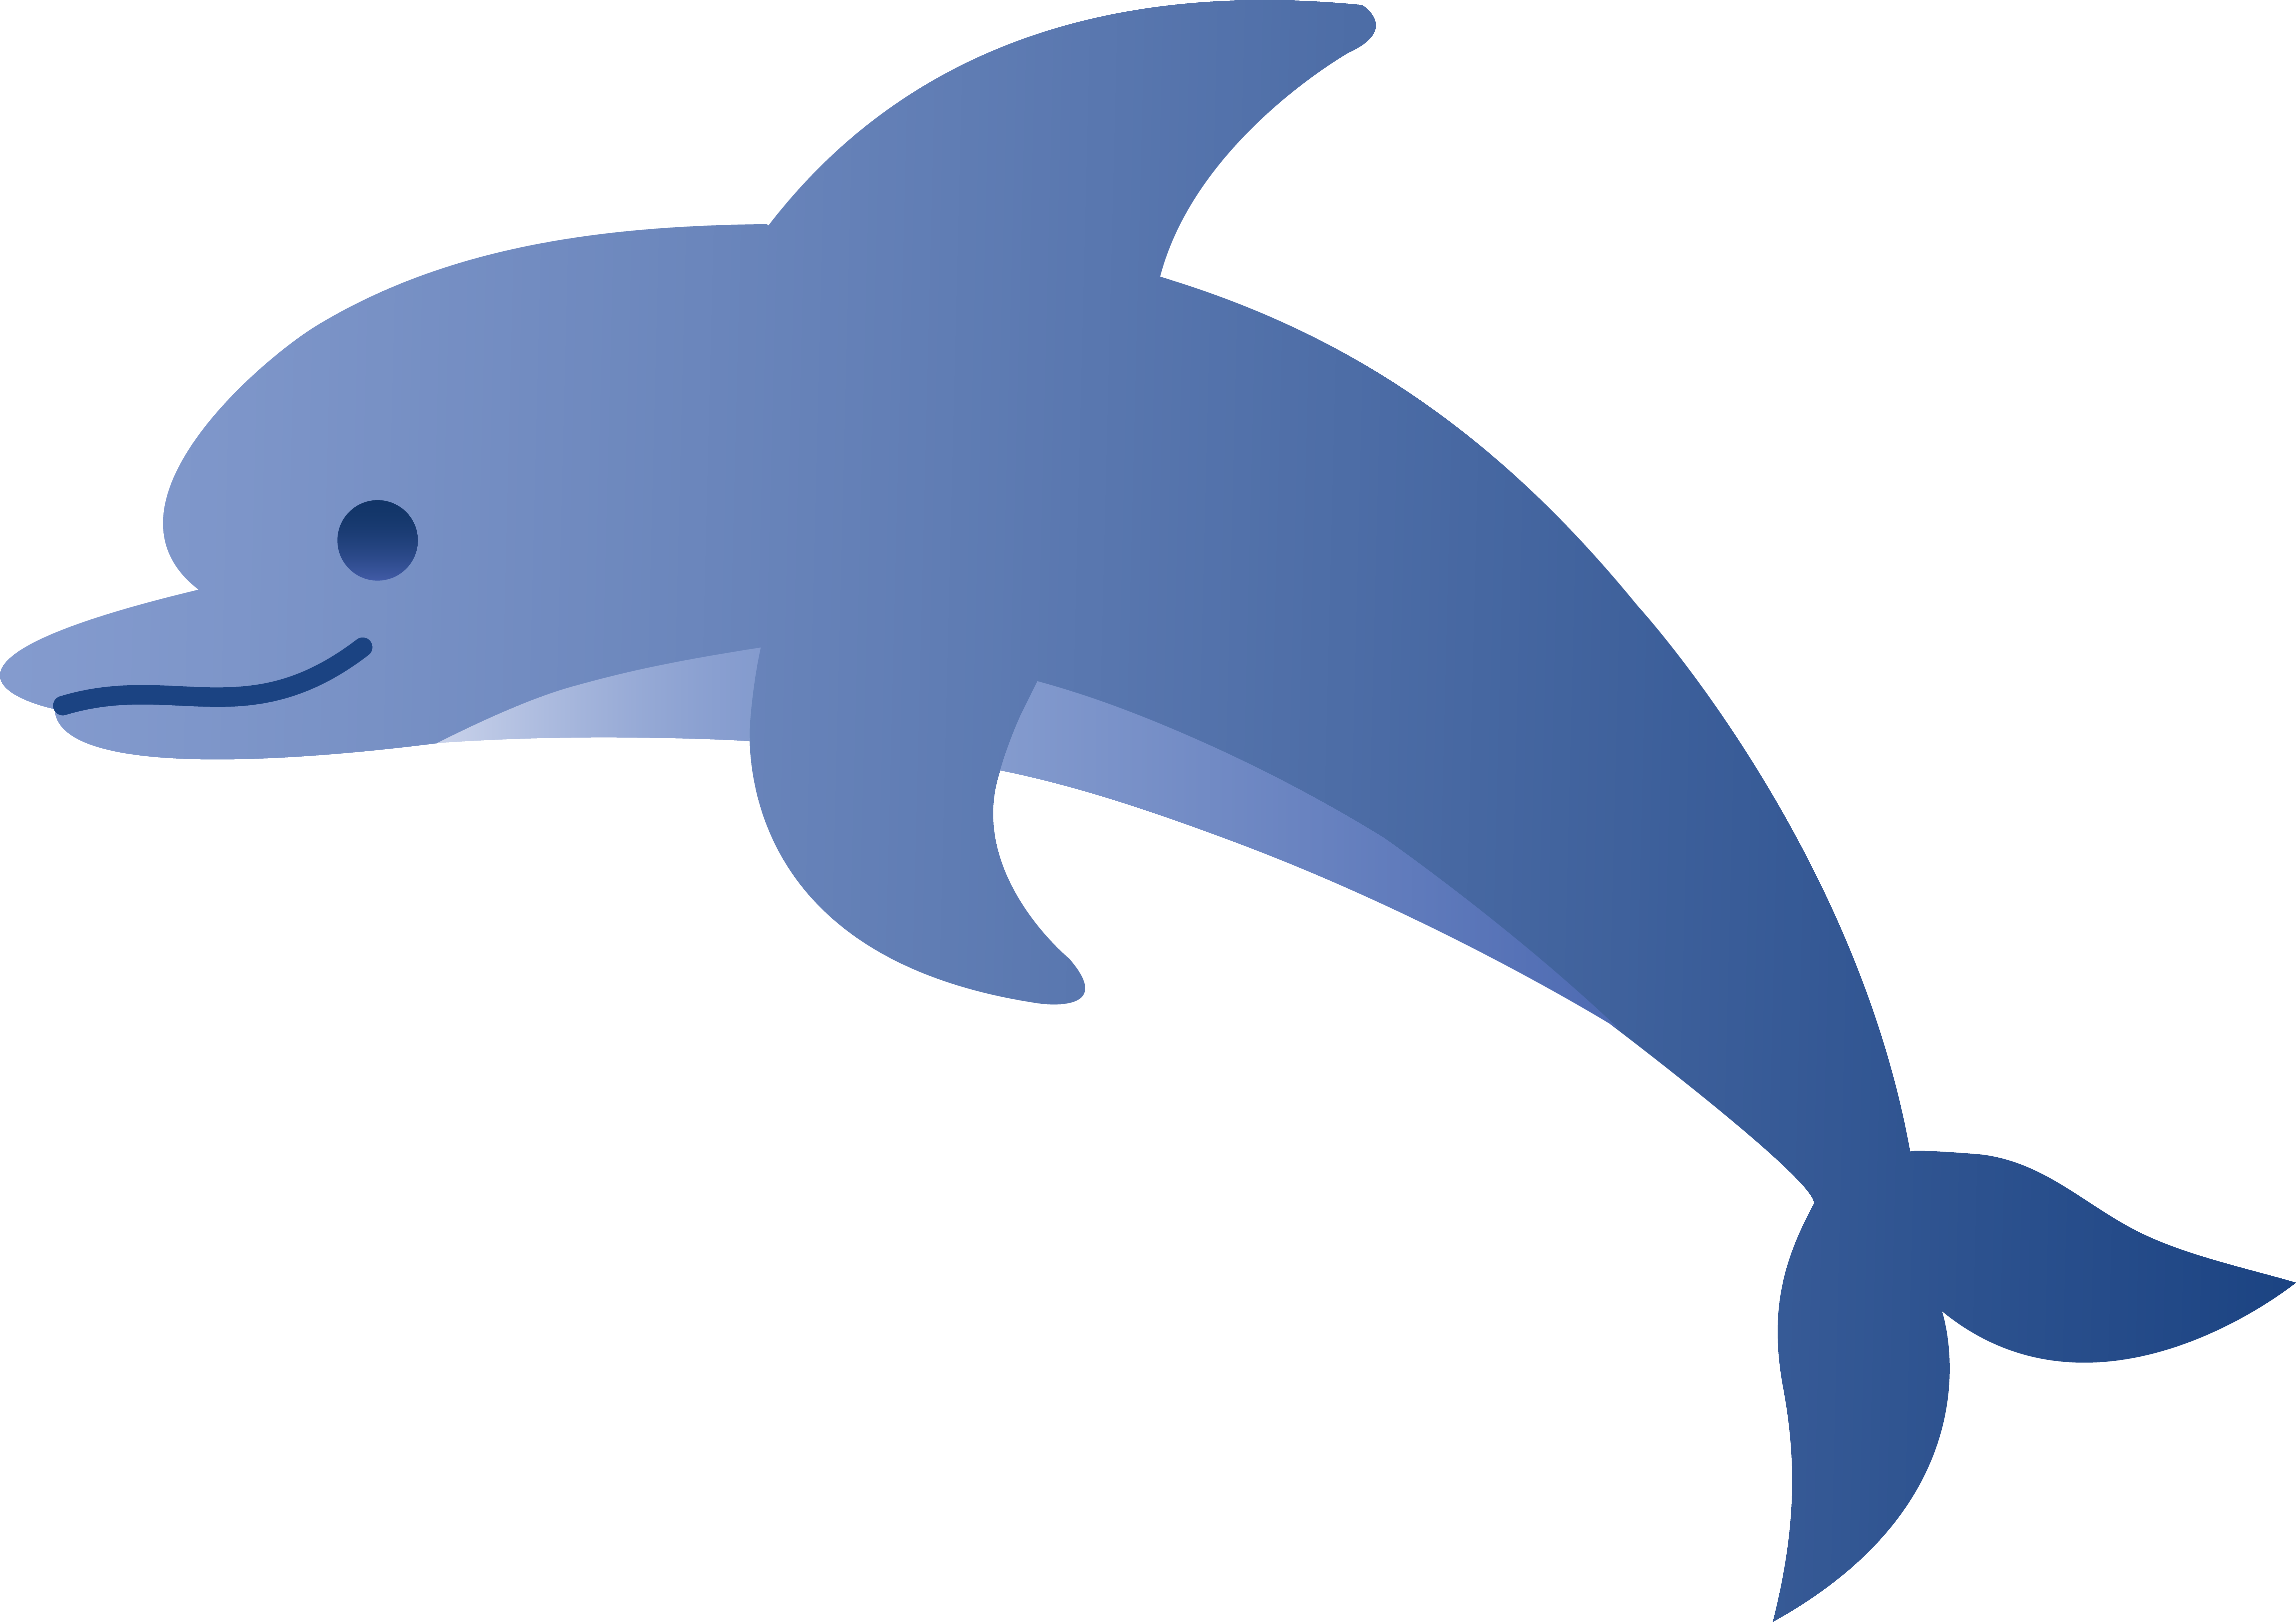 Dolphin Images Cartoon - Cliparts.co